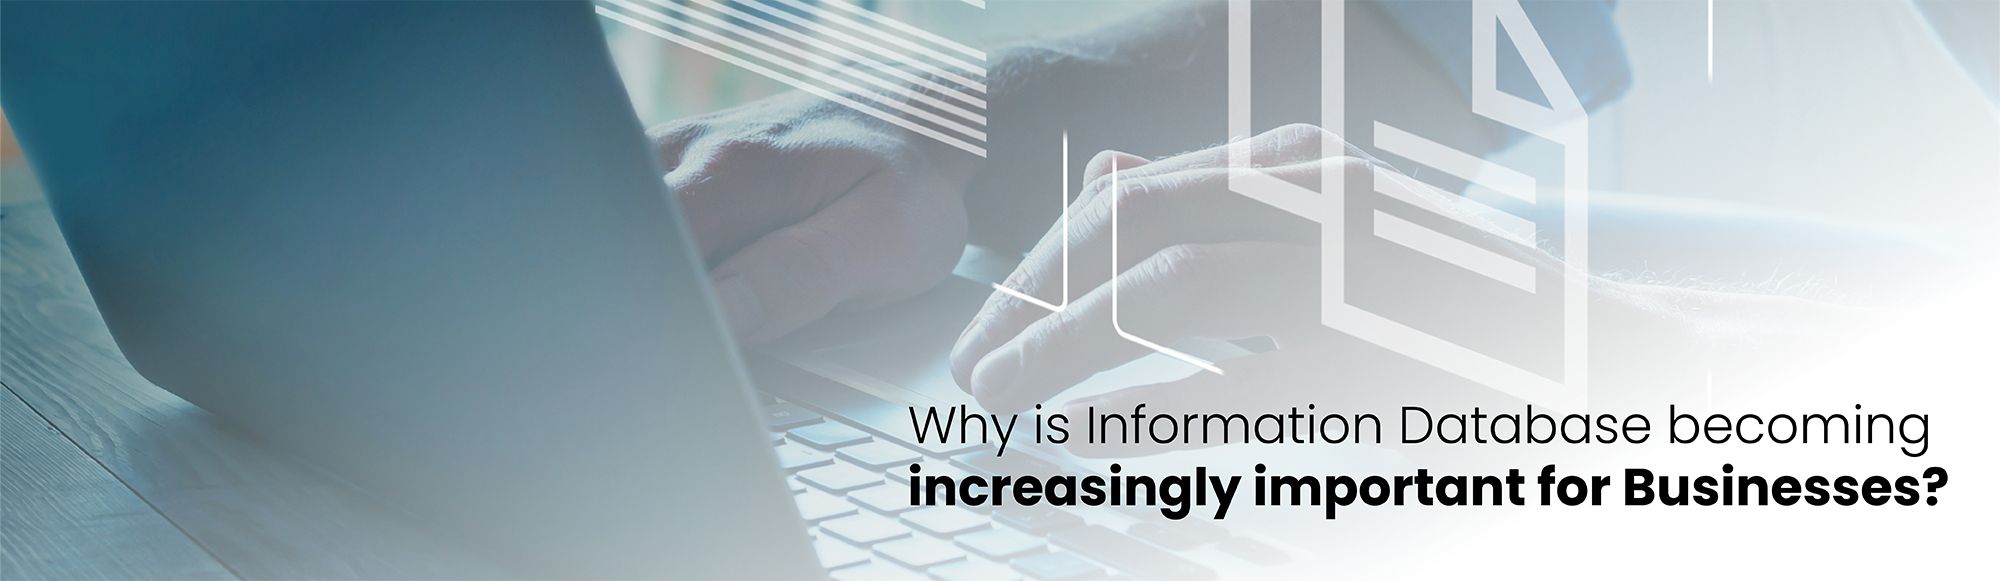 why-is-information-database-becoming-increasingly-important-for-businesses